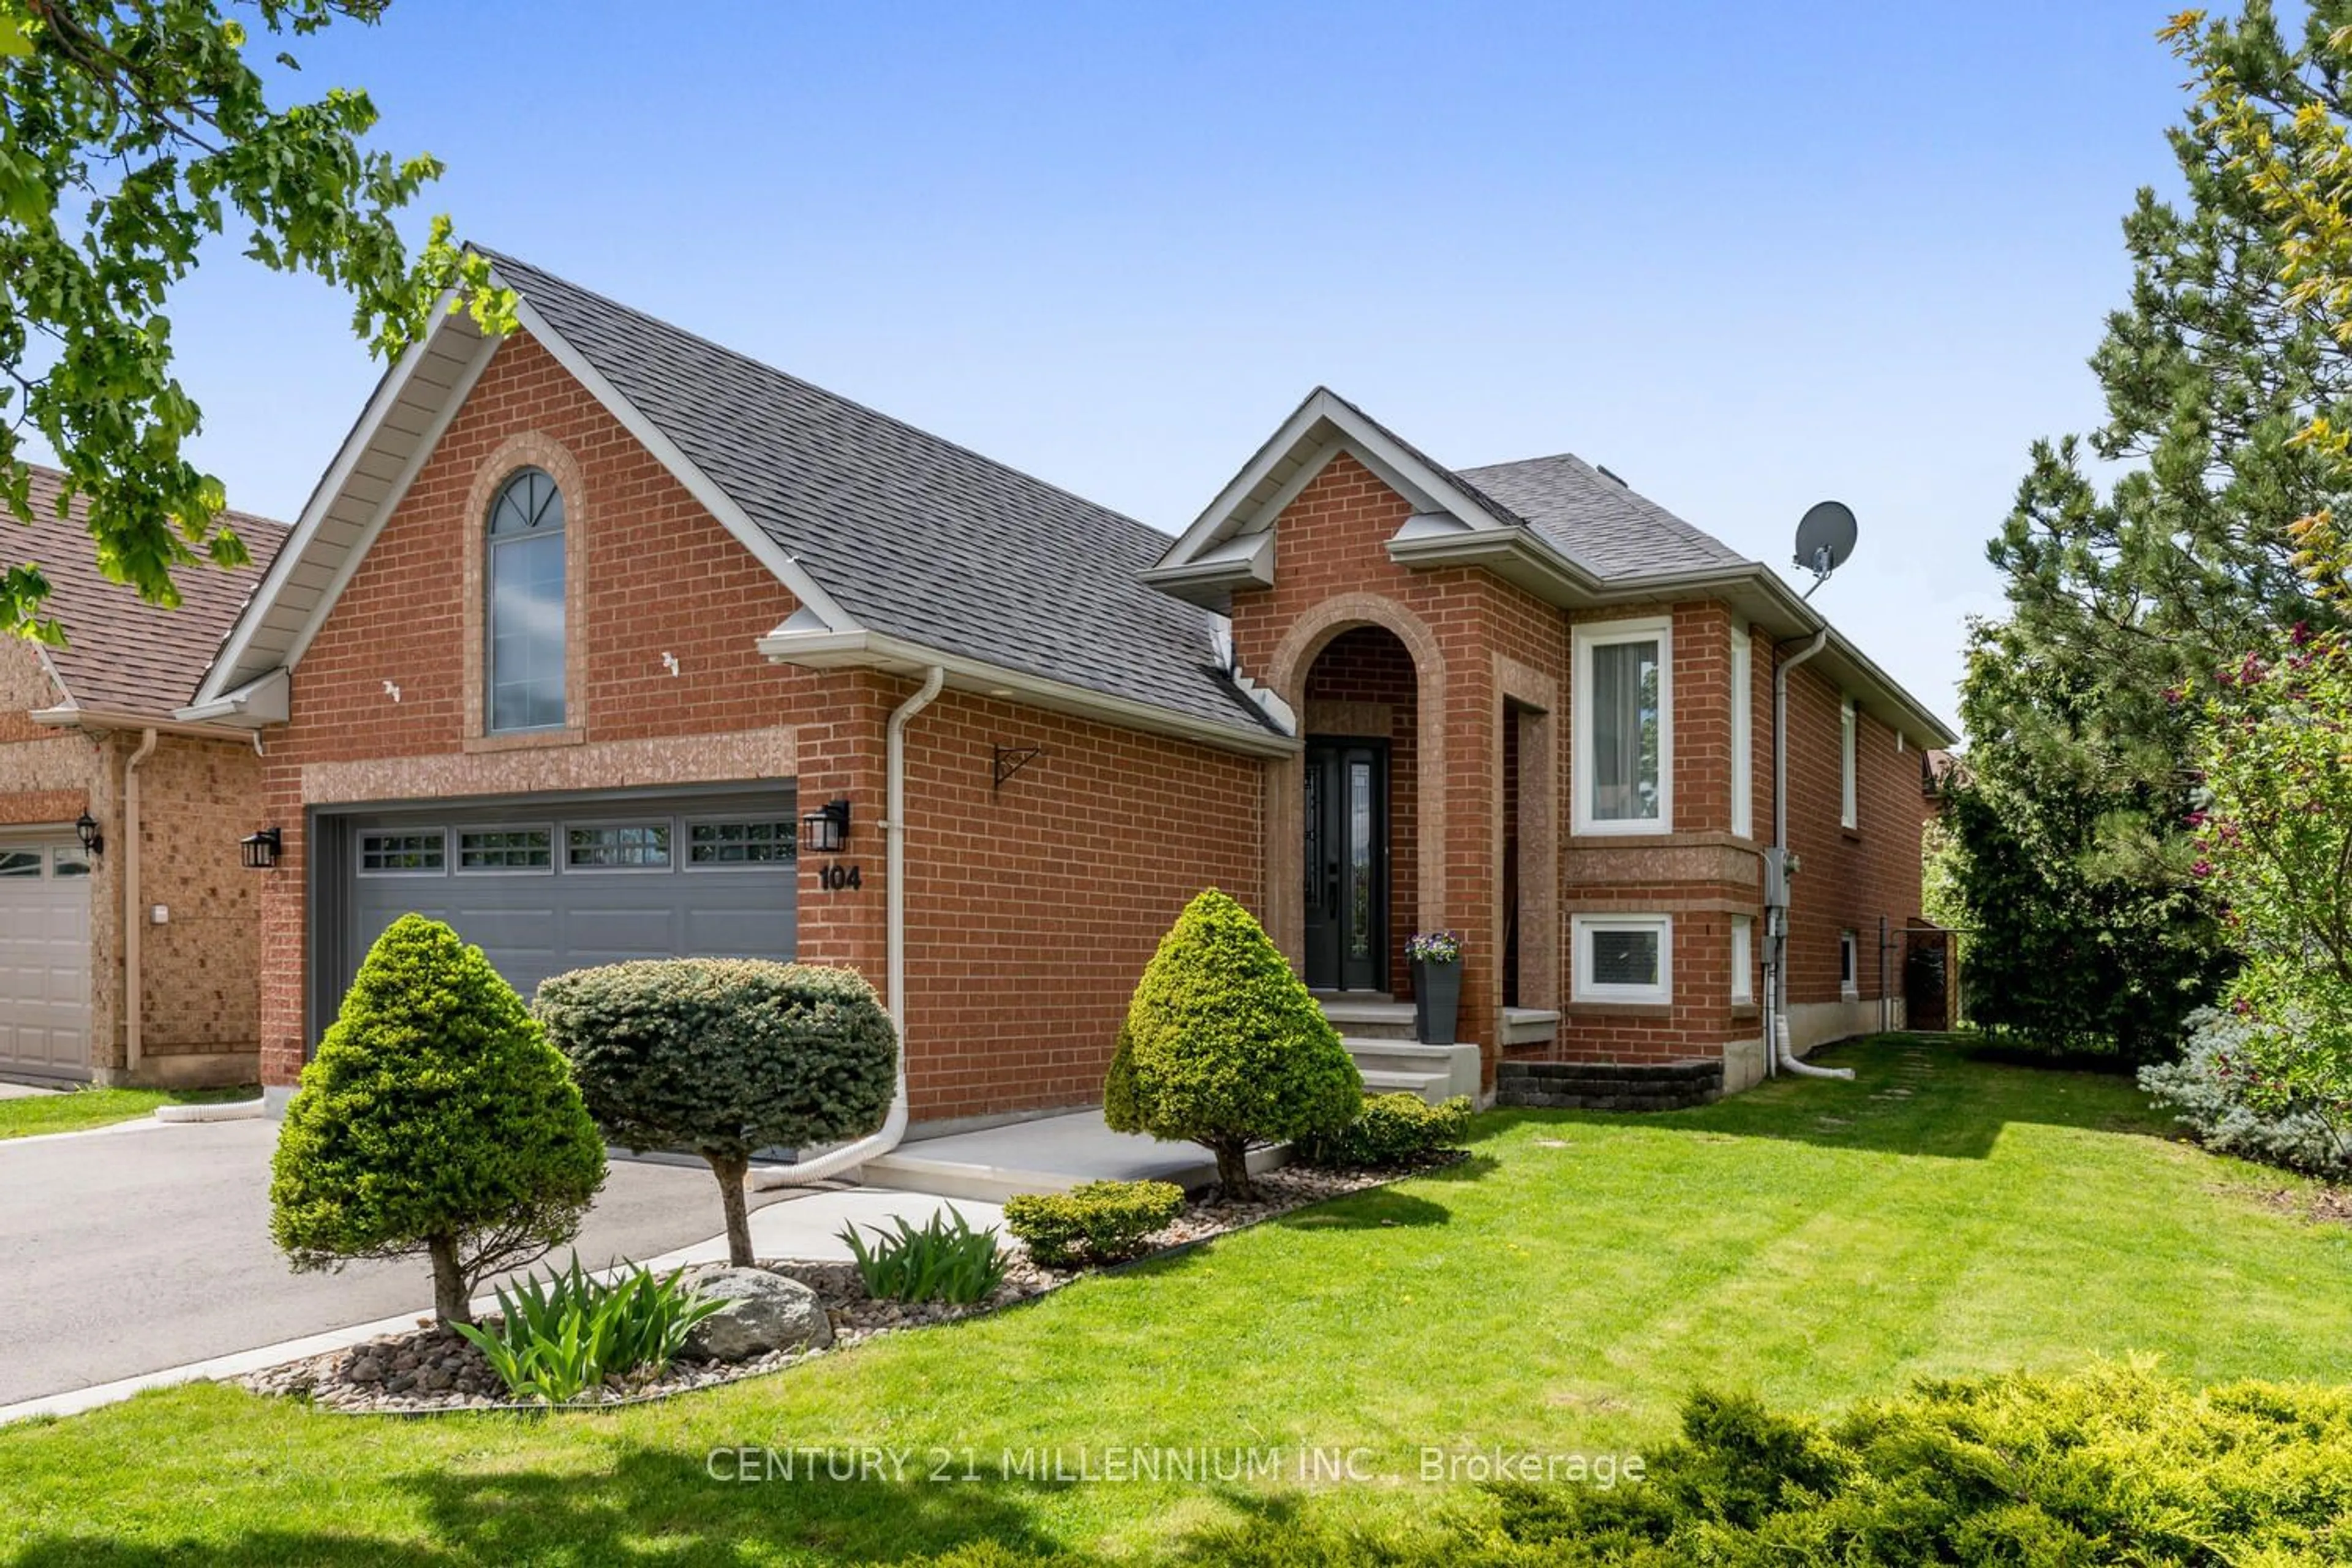 Home with brick exterior material for 104 Royal Orchard Dr, Brampton Ontario L6X 4L4